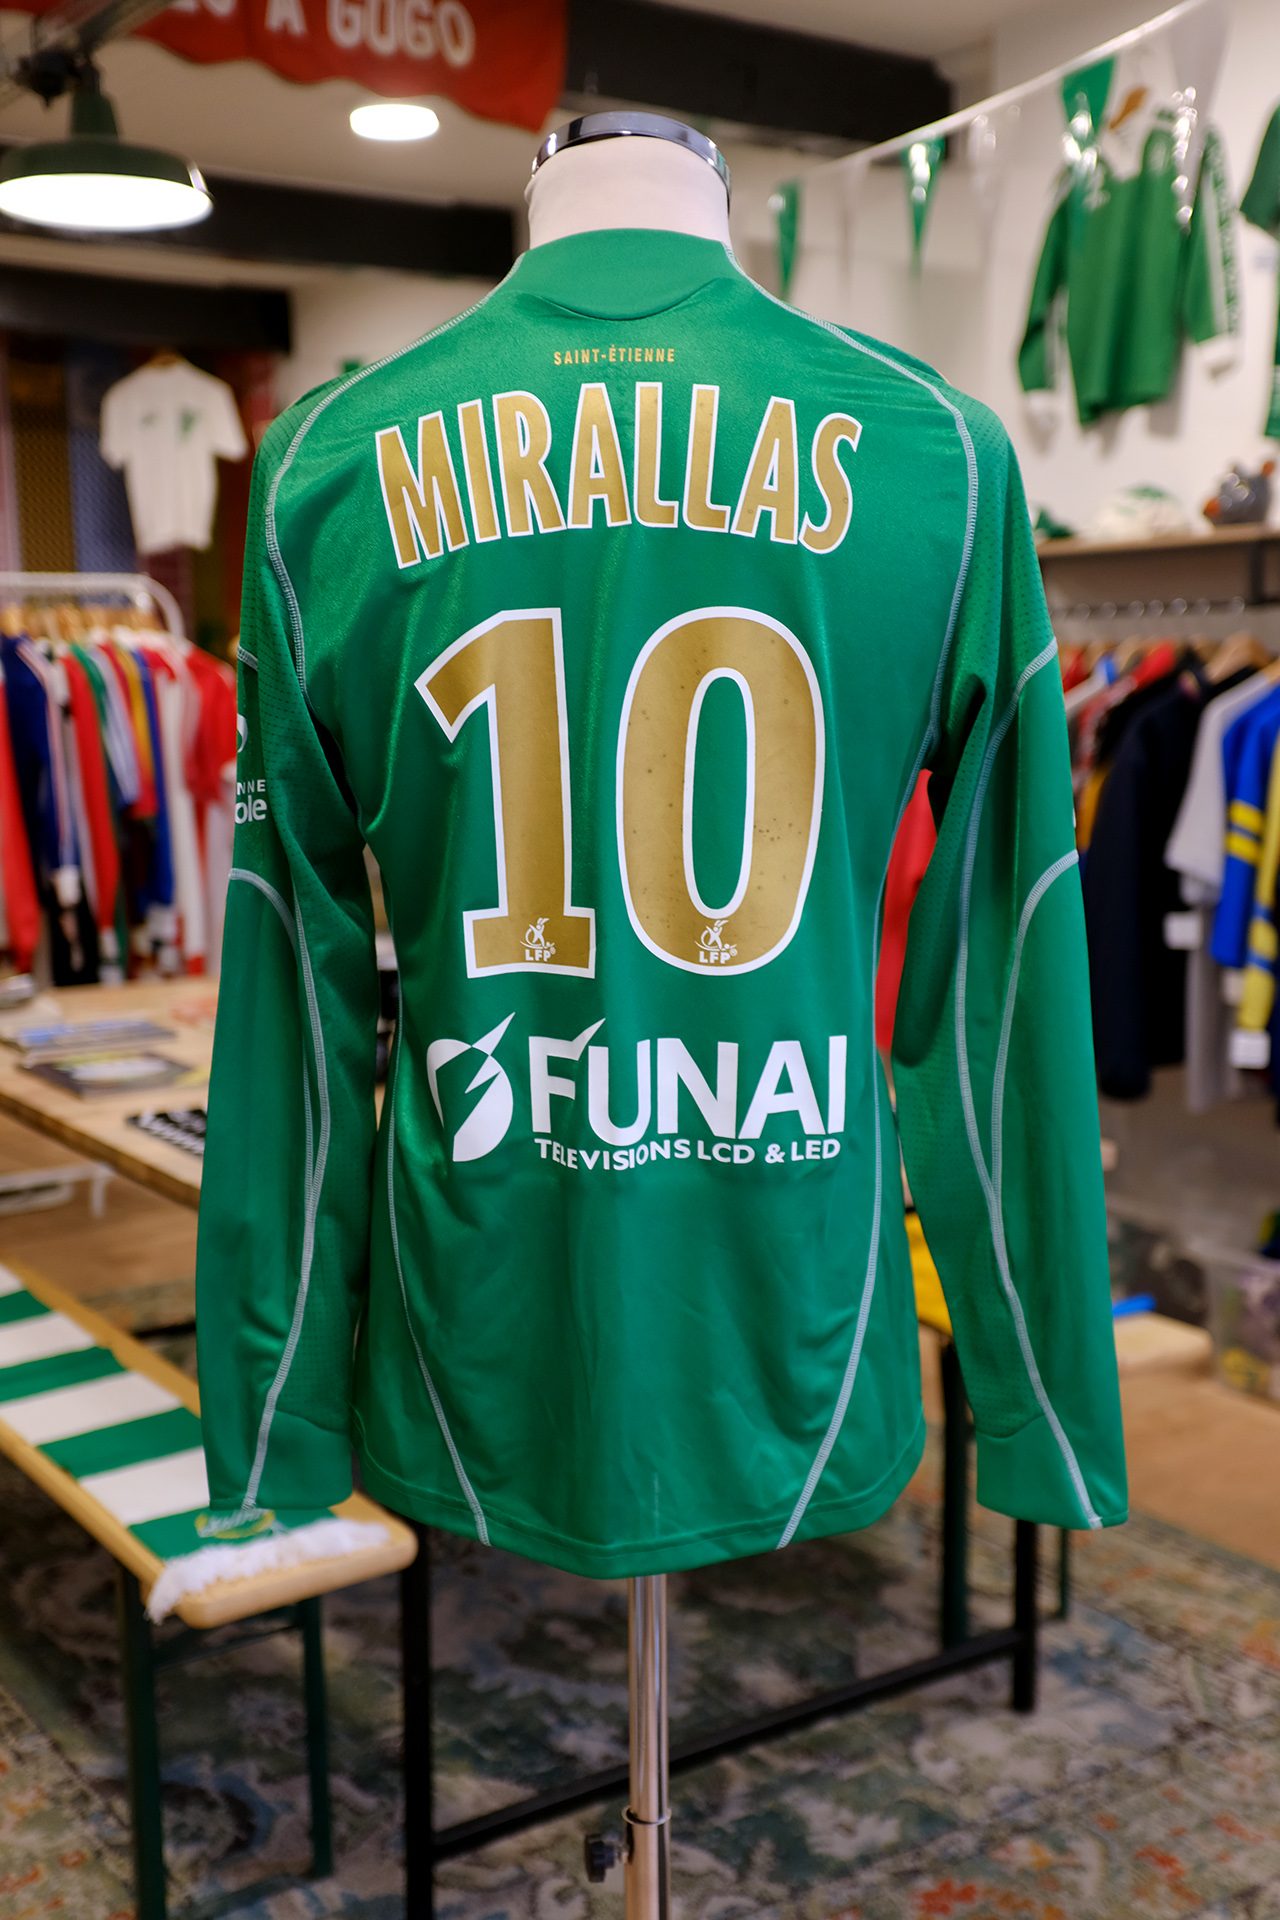 Maillot ASSE kevin mirallas